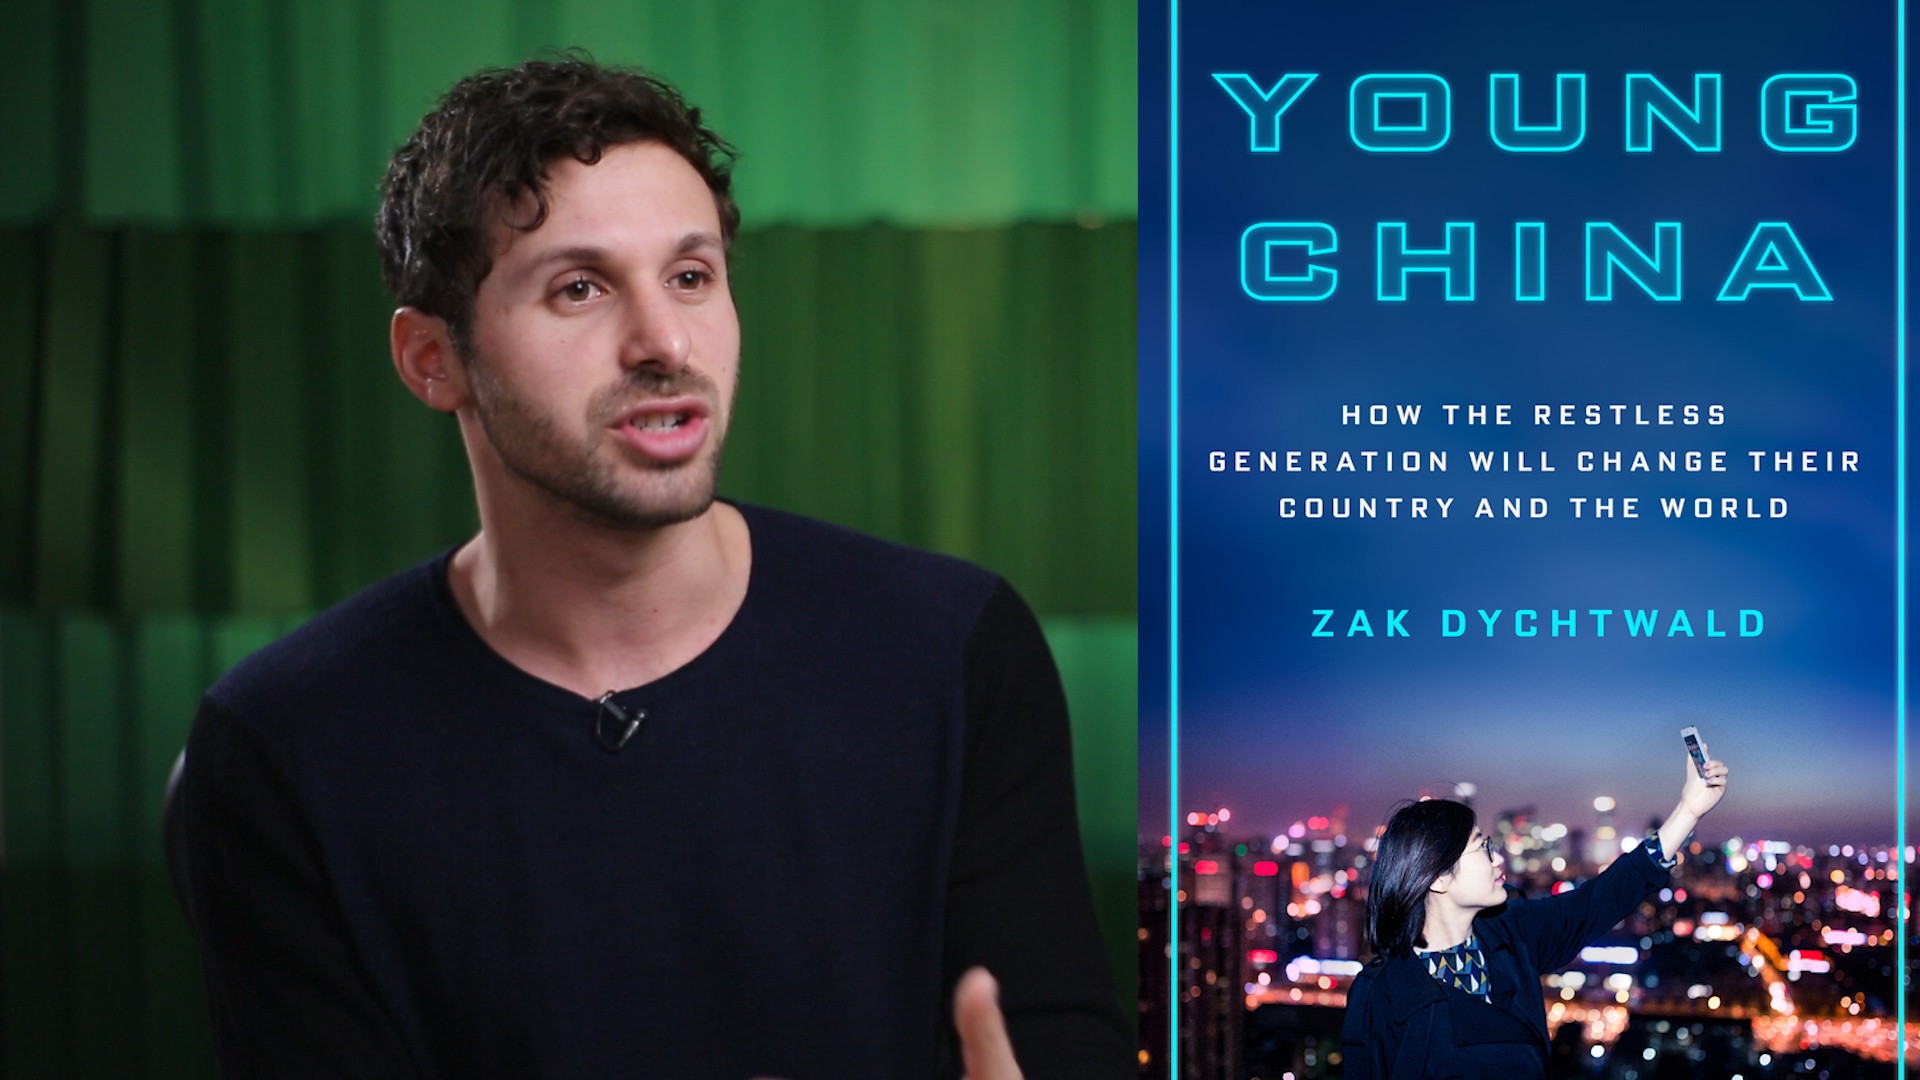 Zak Dychtwald and his book Young China